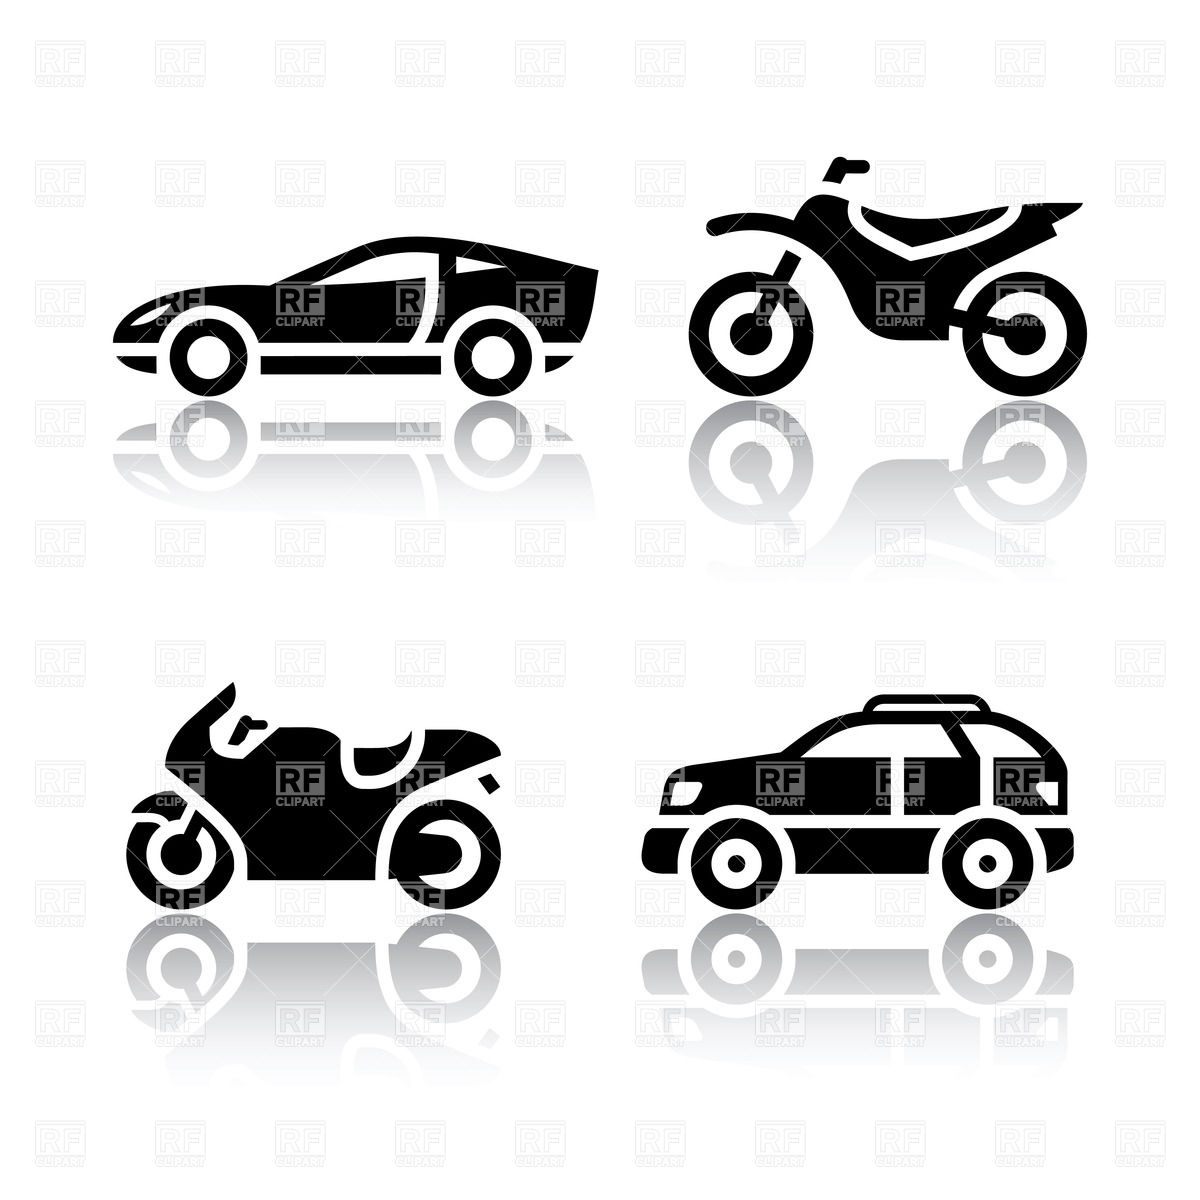 Suv And Sports Car 18114 Download Royalty Free Vector Clipart  Eps